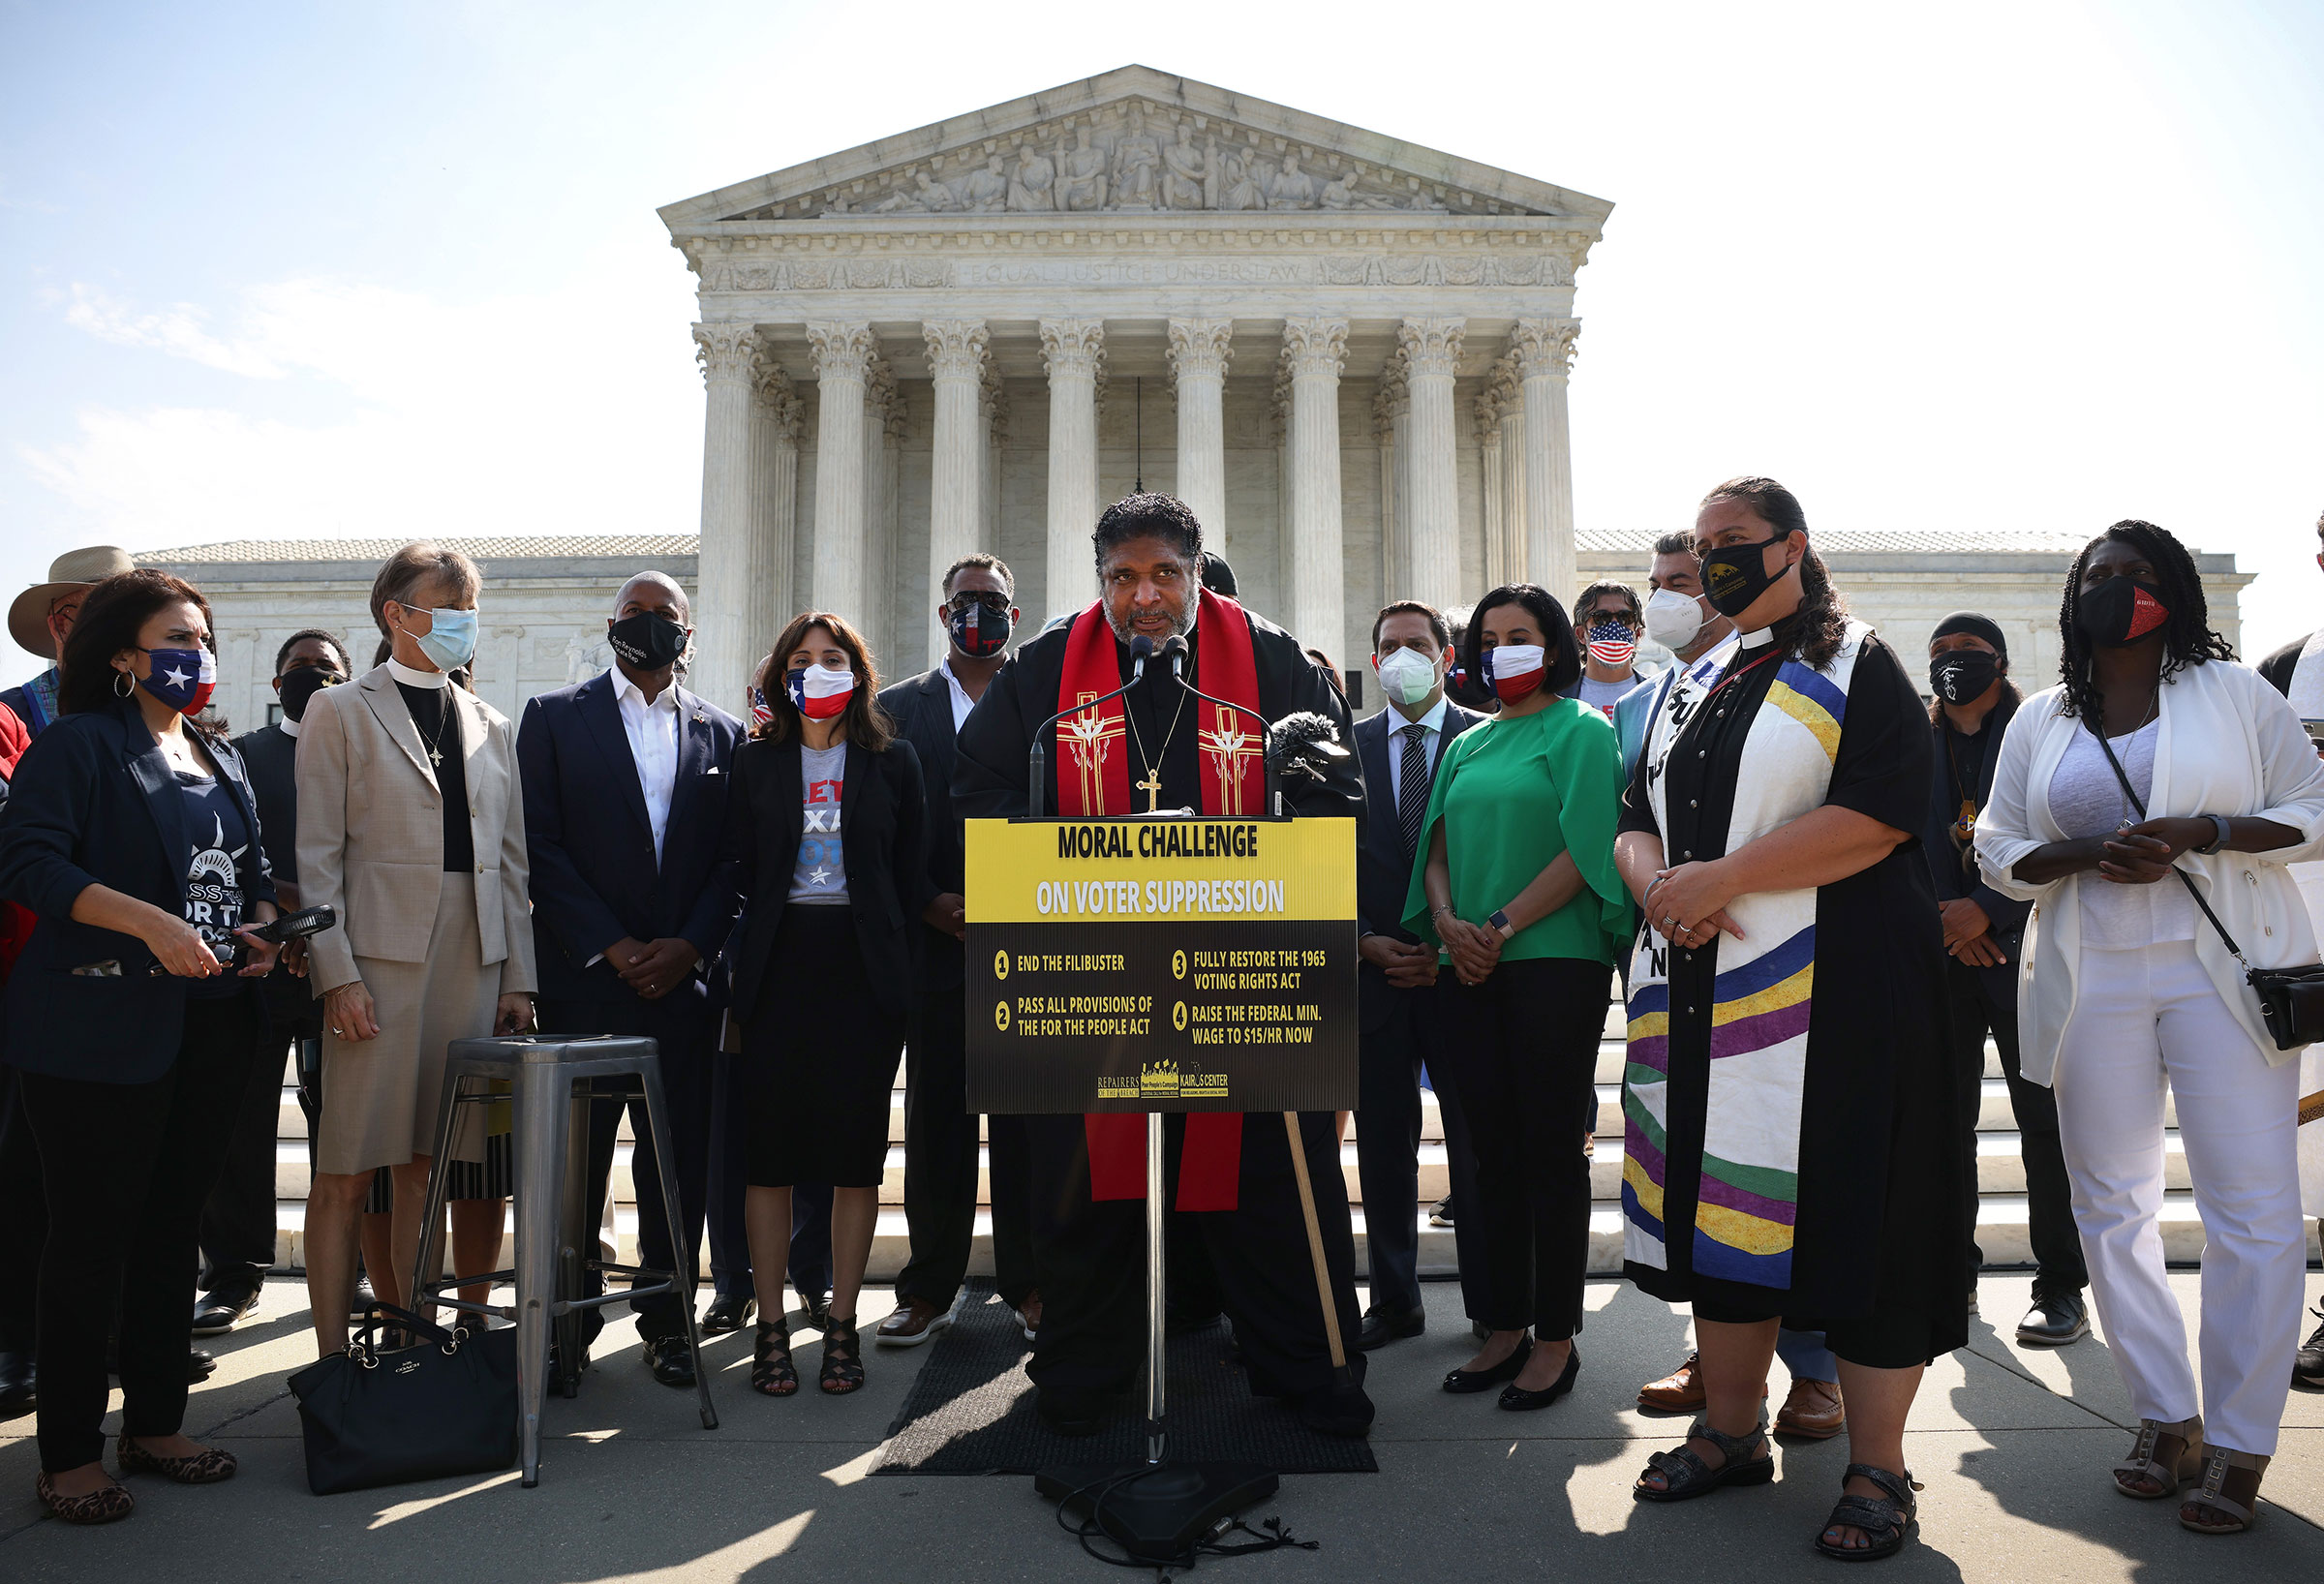 Rev. William Barber, Co-Chair of the Poor People’s Campaign, speaks alongside Texas State Representatives and fellow religious leaders, as they prepare to deliver a petition to Senate Majority Leader Charles Schumer calling for an end to the filibuster, the passage of the For The People Act and restoring the Voting Rights Act, at the U.S. Supreme Court in Washington, on Aug. 12, 2021. (Kevin Dietsch—Getty Images)